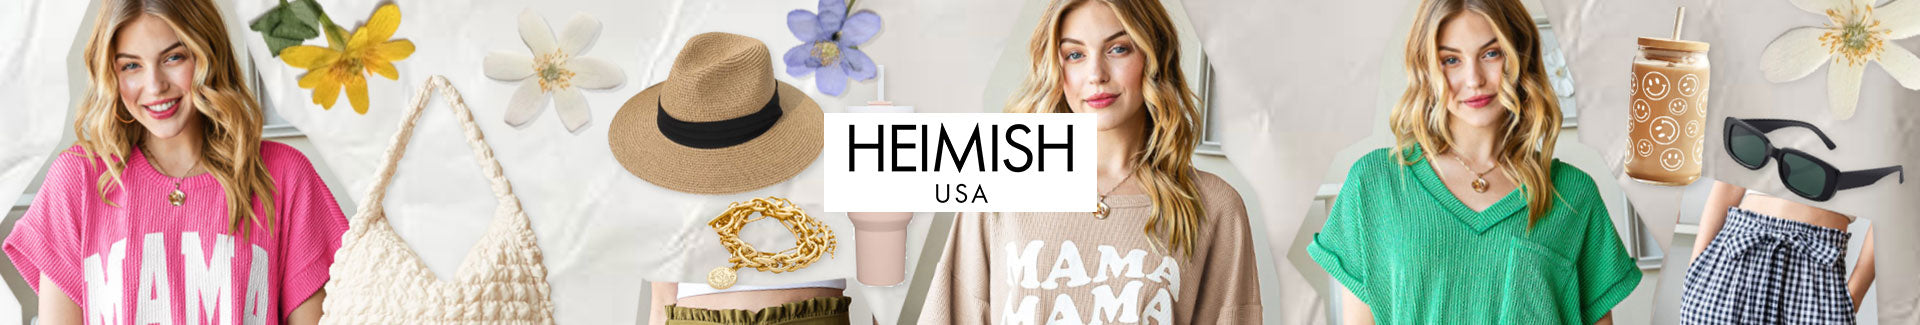 Heimish Tops & Dresses for Women on Sale - Daily Fashion